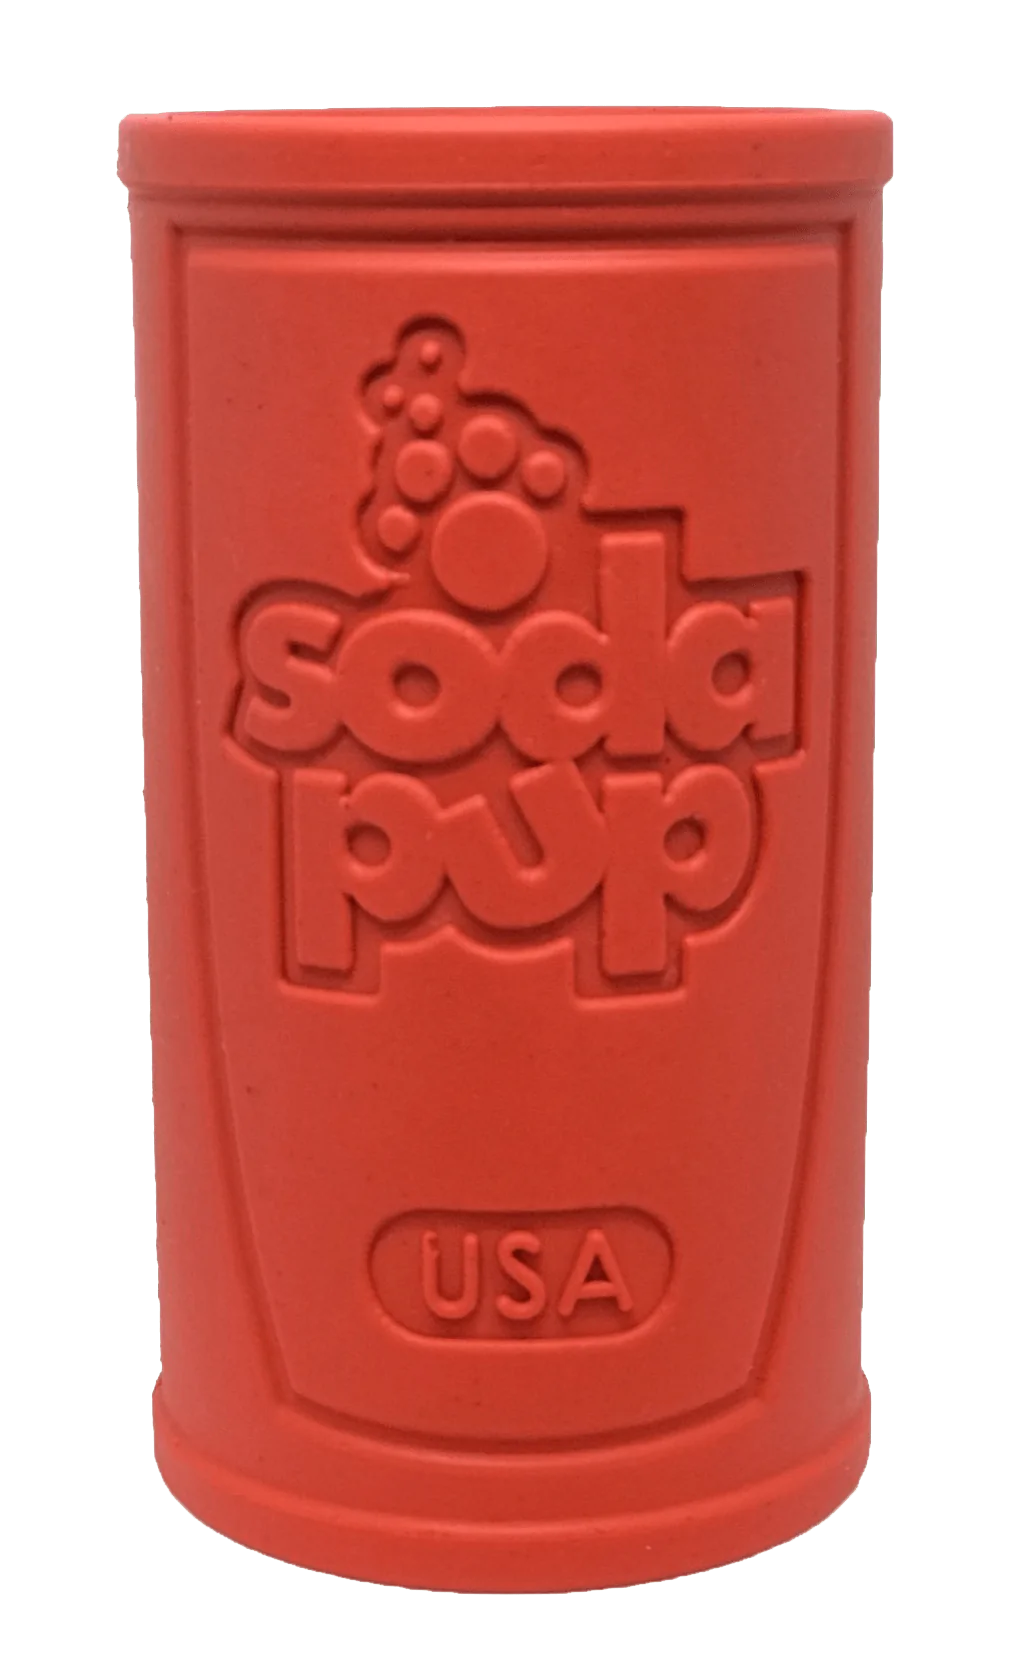 SodaPup Retro Soda Can Durable Rubber Chew Toy and Treat Dispenser